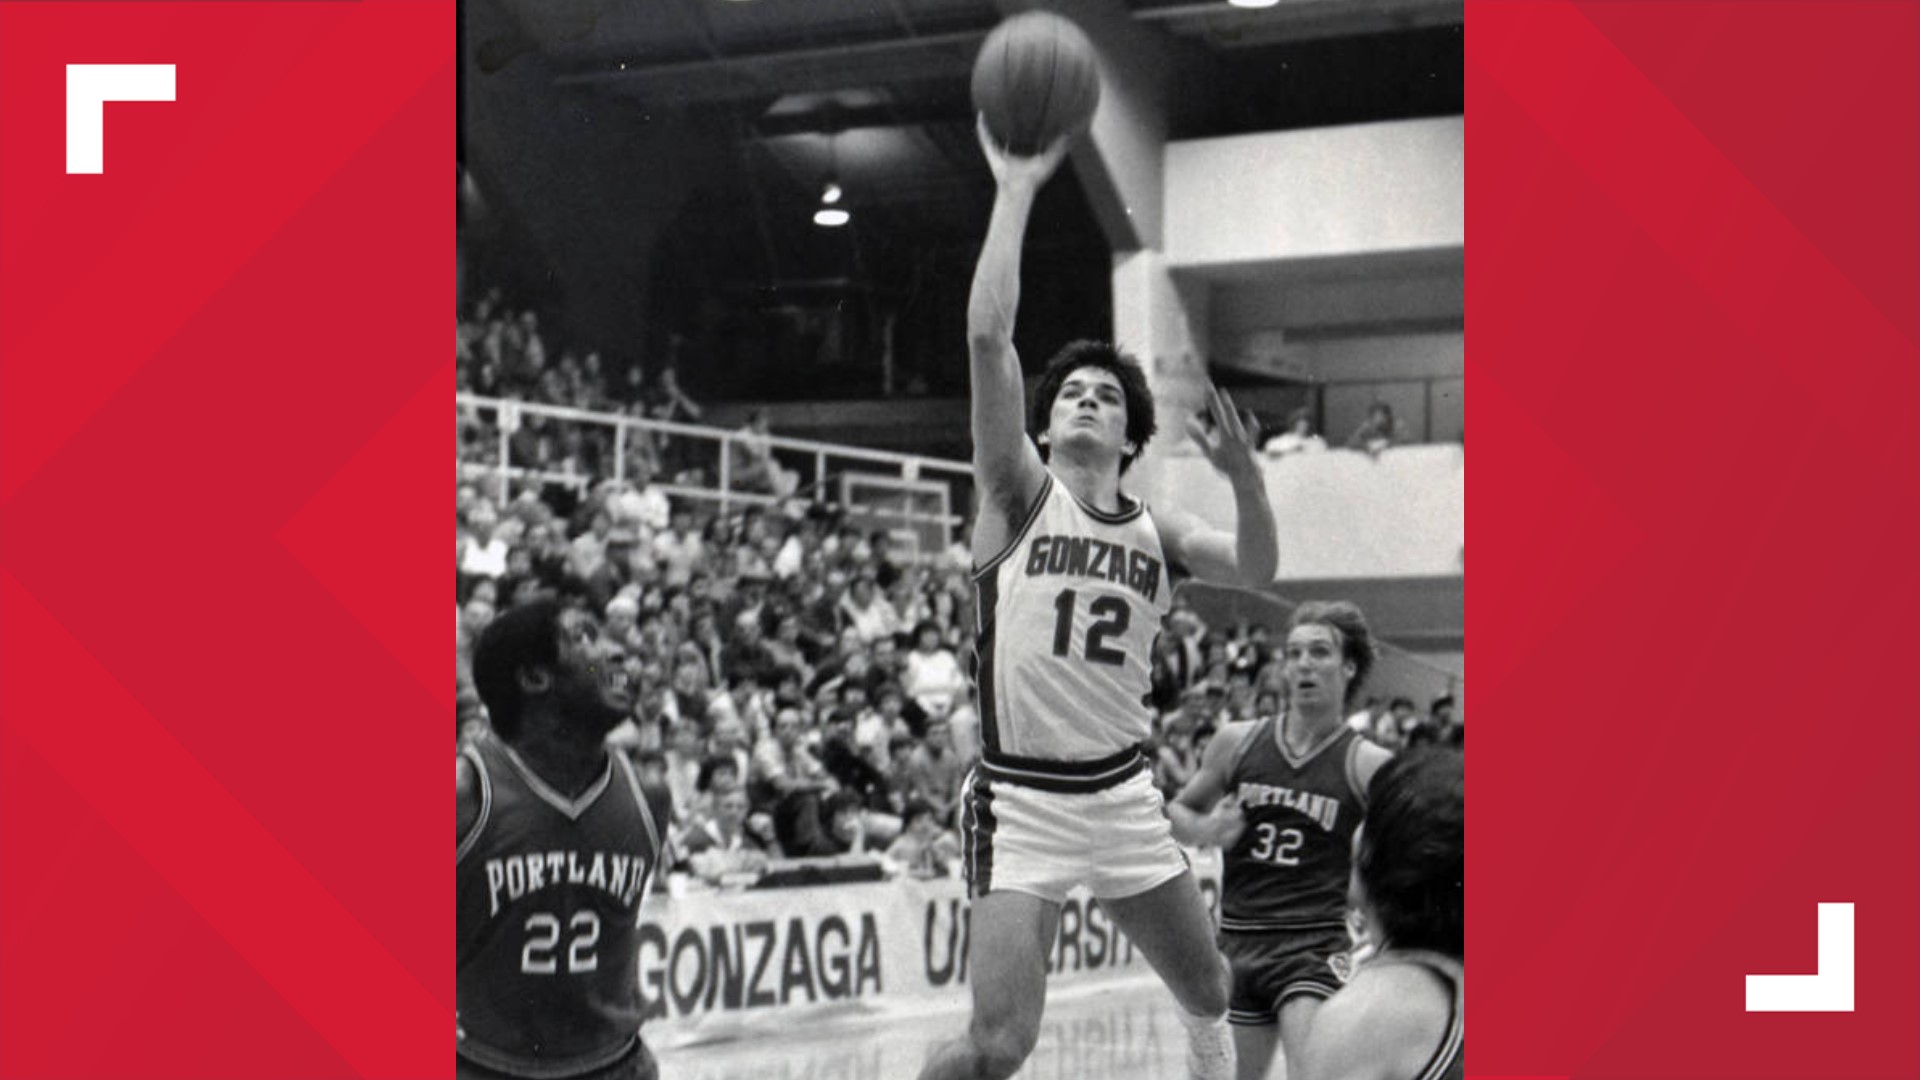 The Gonzaga legend would apply so much pressure to steal the ball from his teammates. They were reluctant to try and dribble the ball after that.